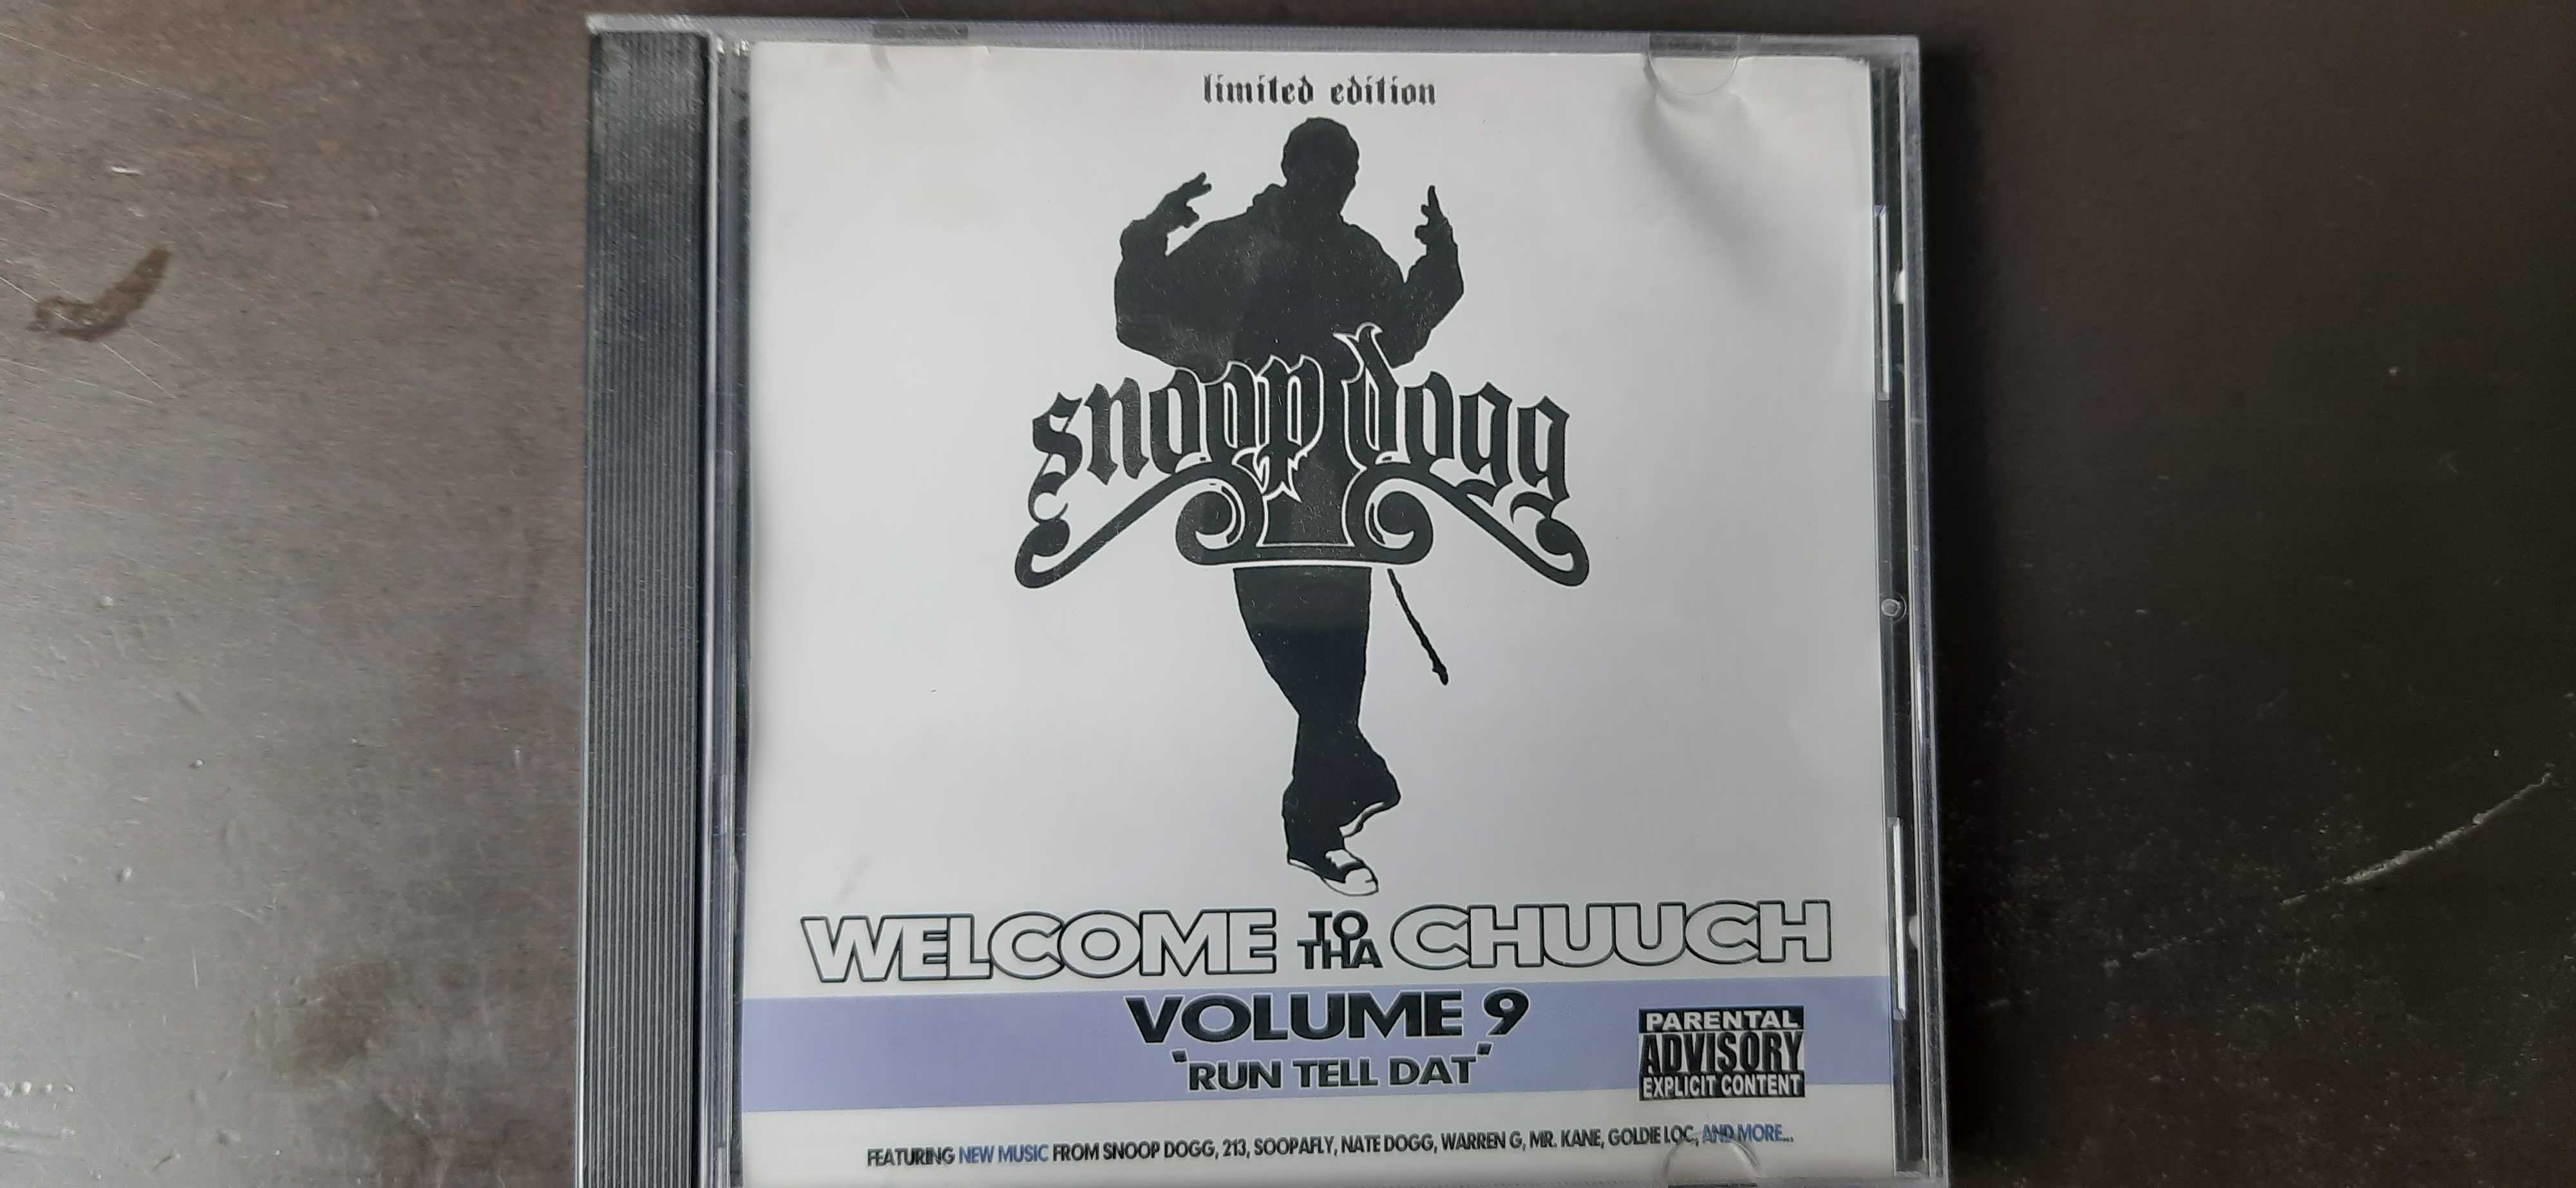 Snoop Dogg - Welcome To Tha Chuuch Volume 9 "Run Tell Dat"
CD